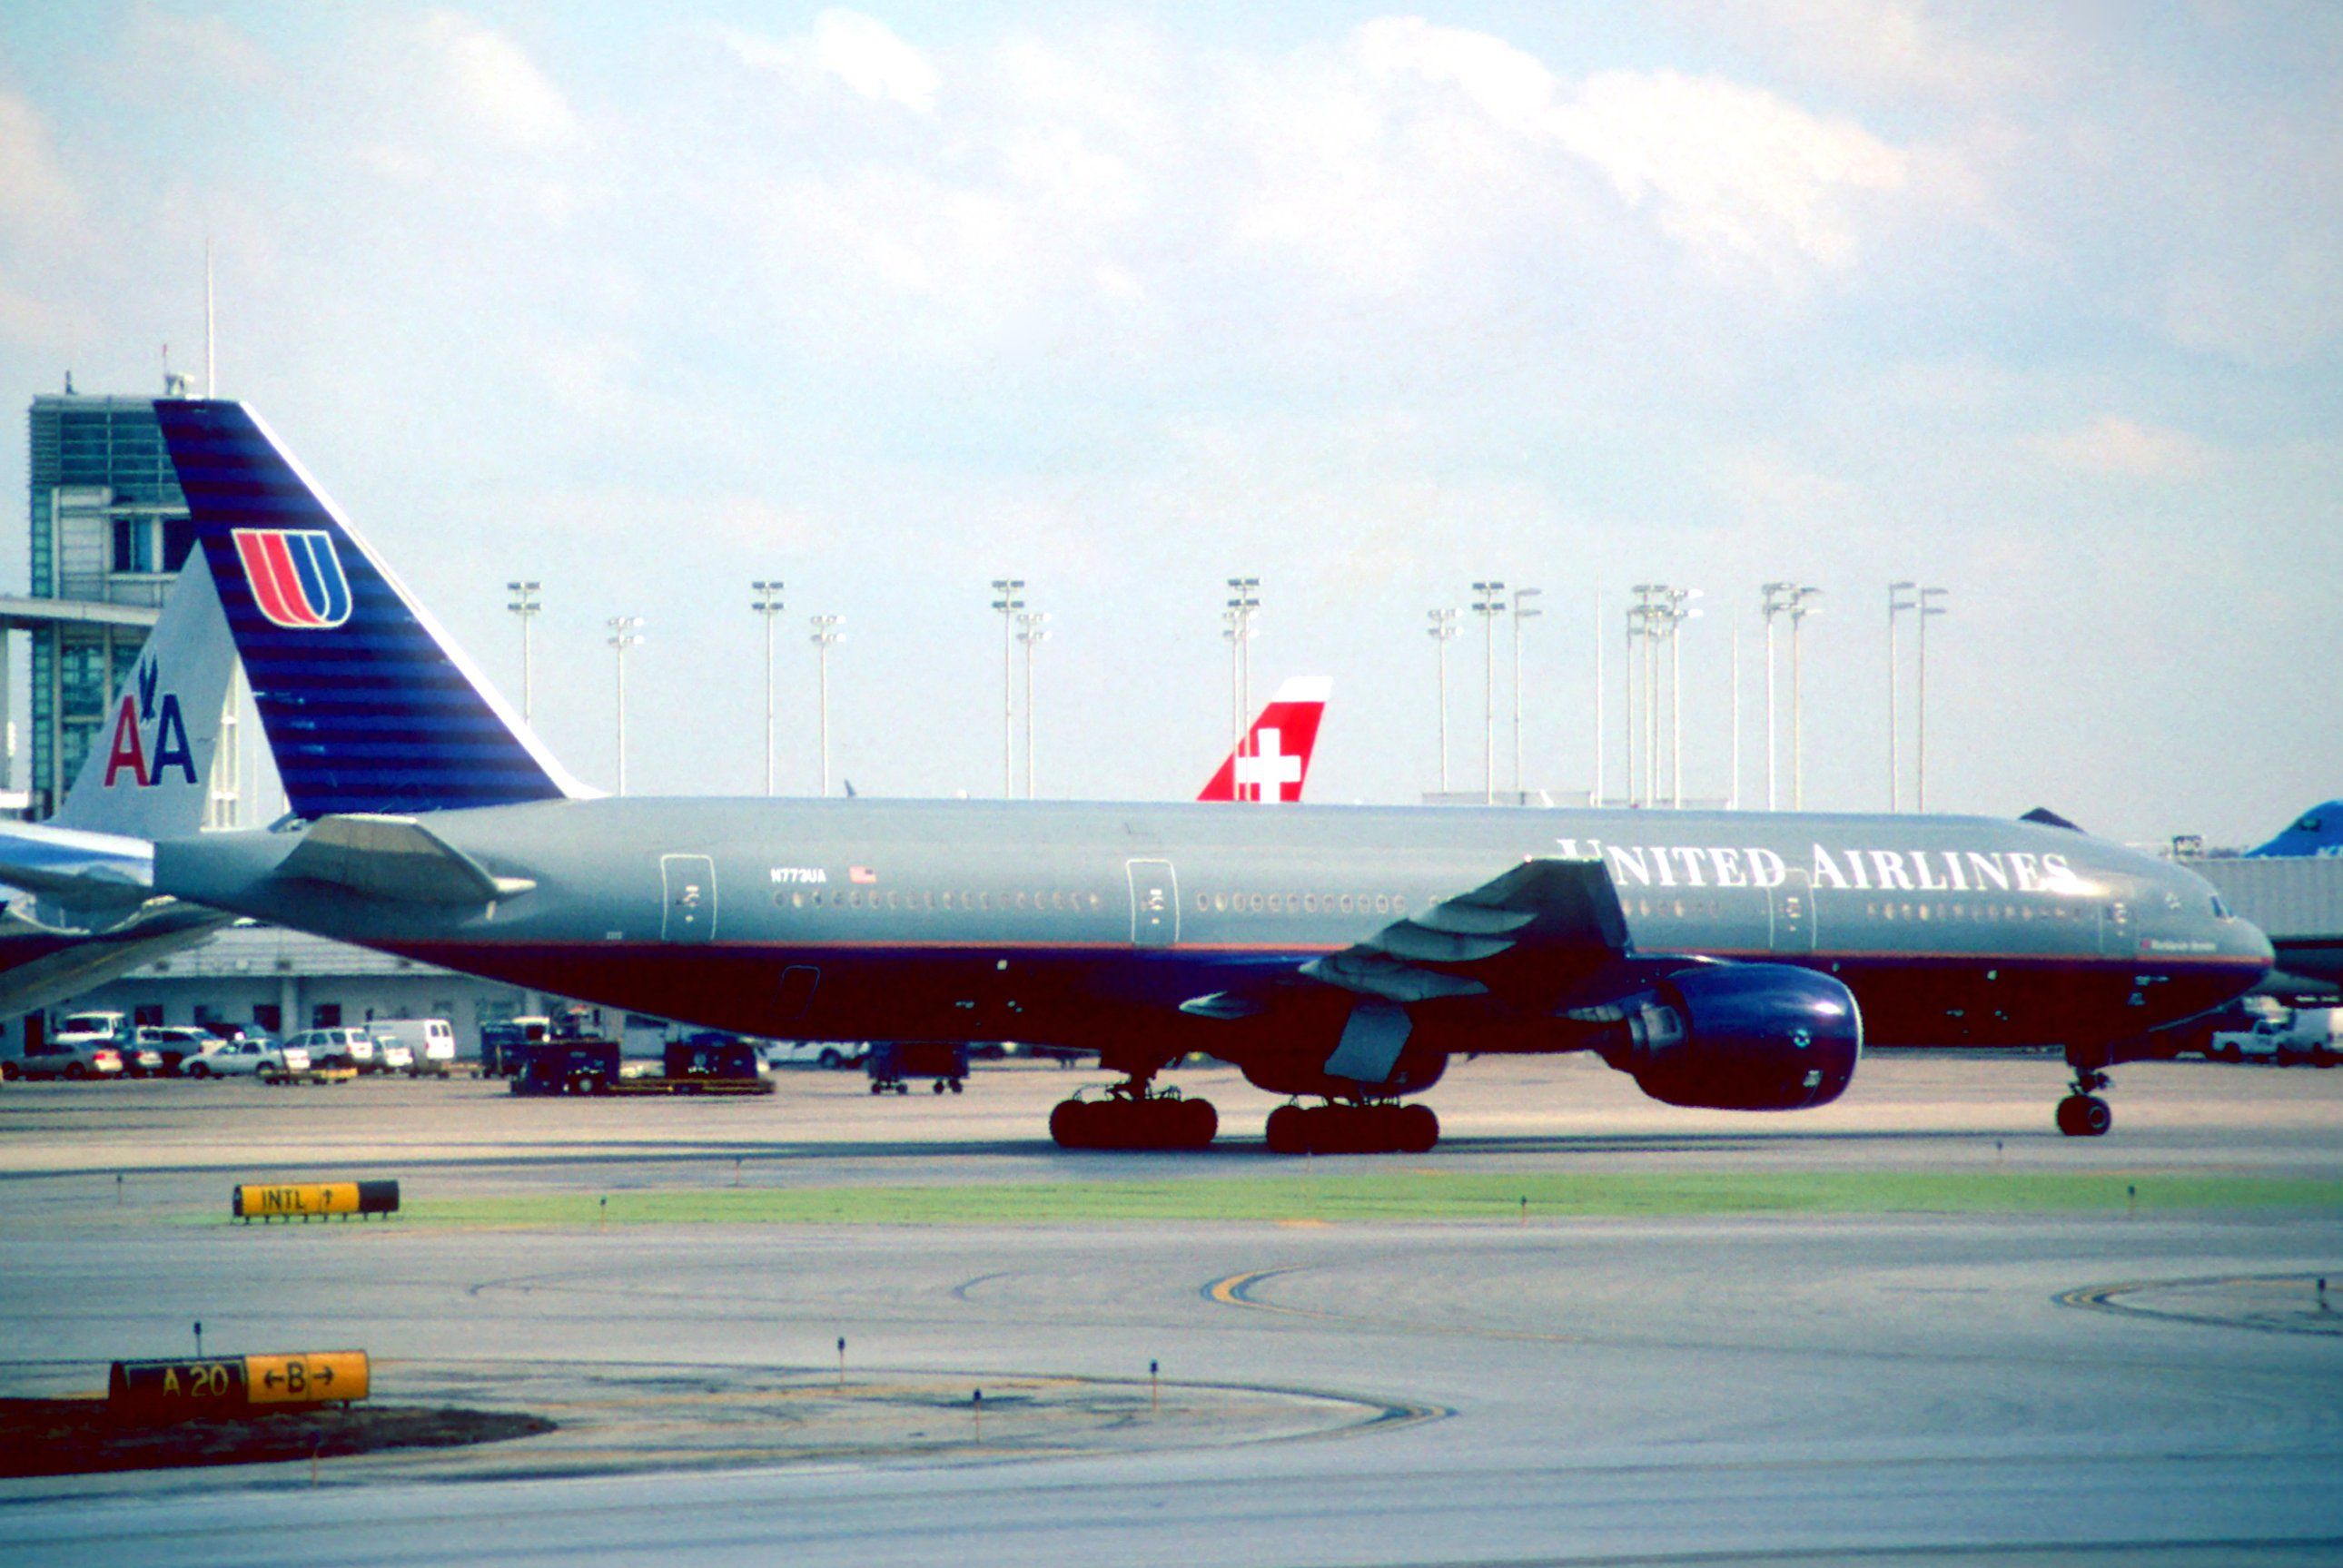 A United Airlines Boeing 777 taxiing to the runway.